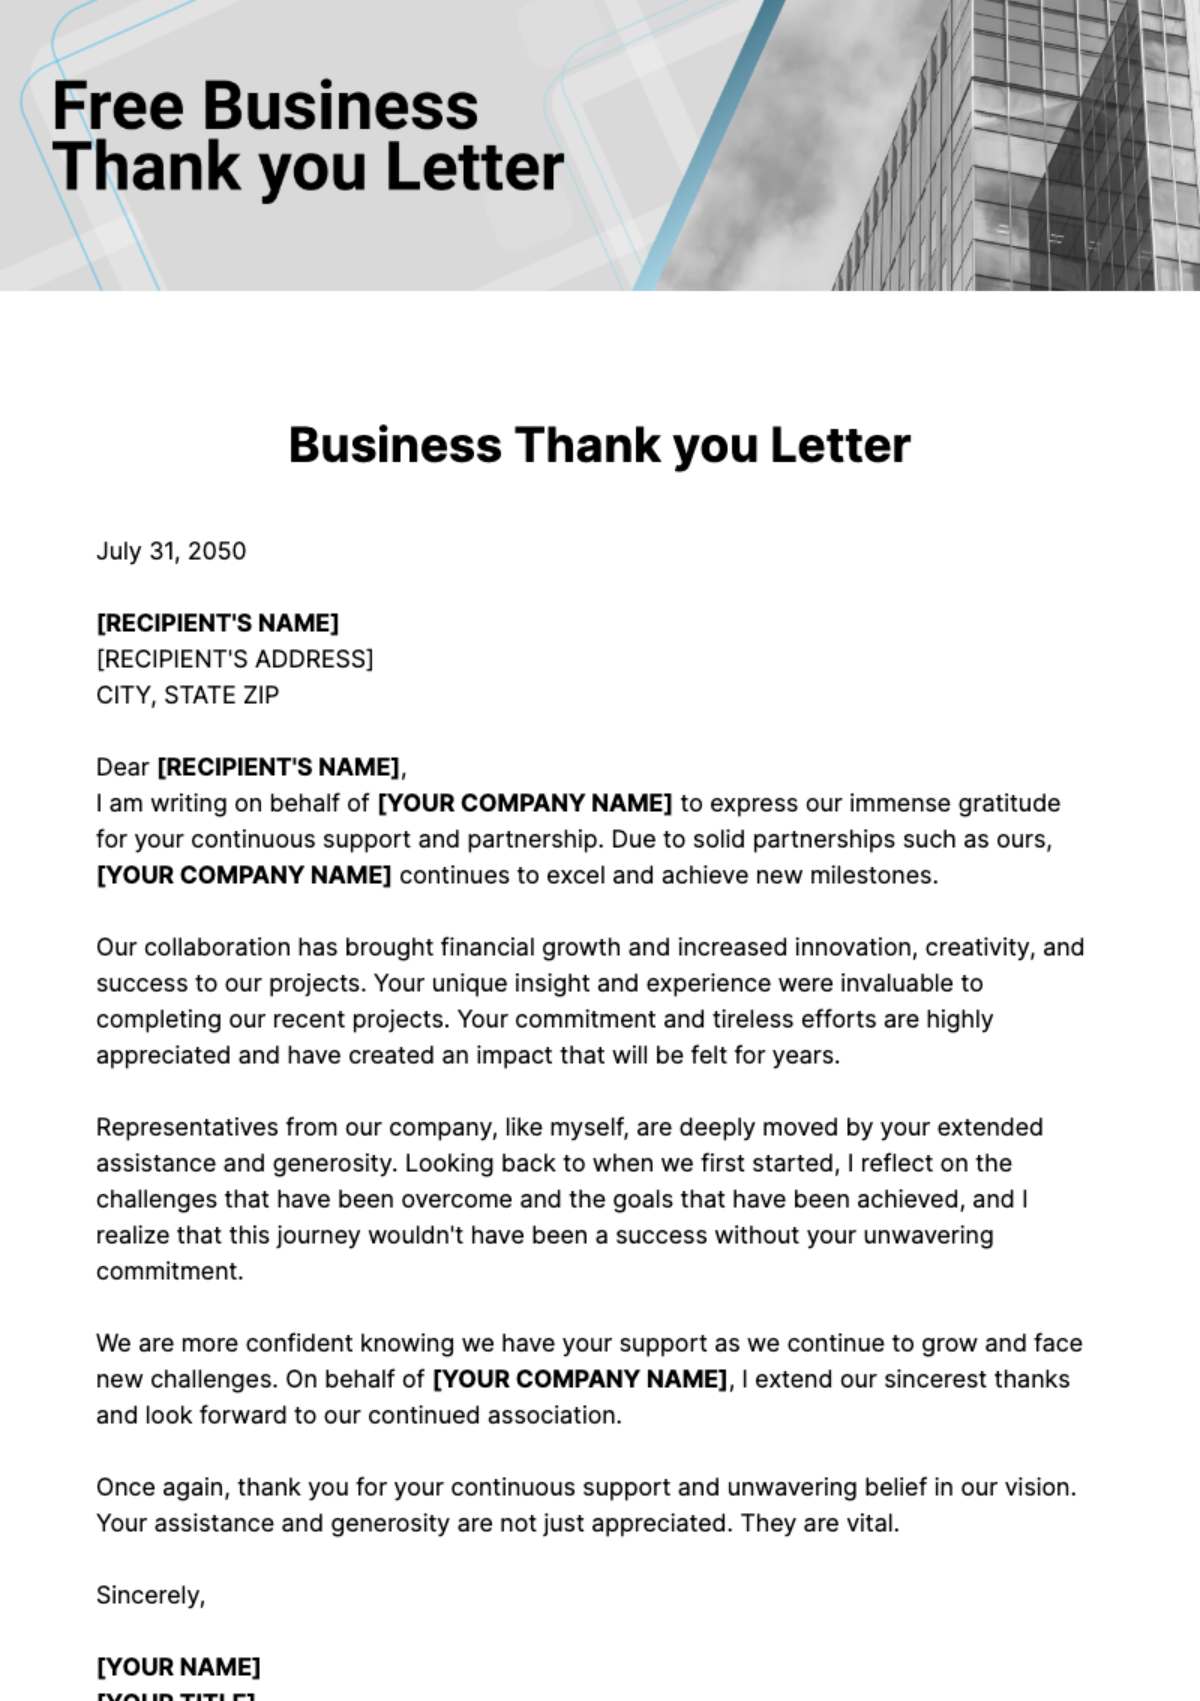 Business Thank you Letter Template